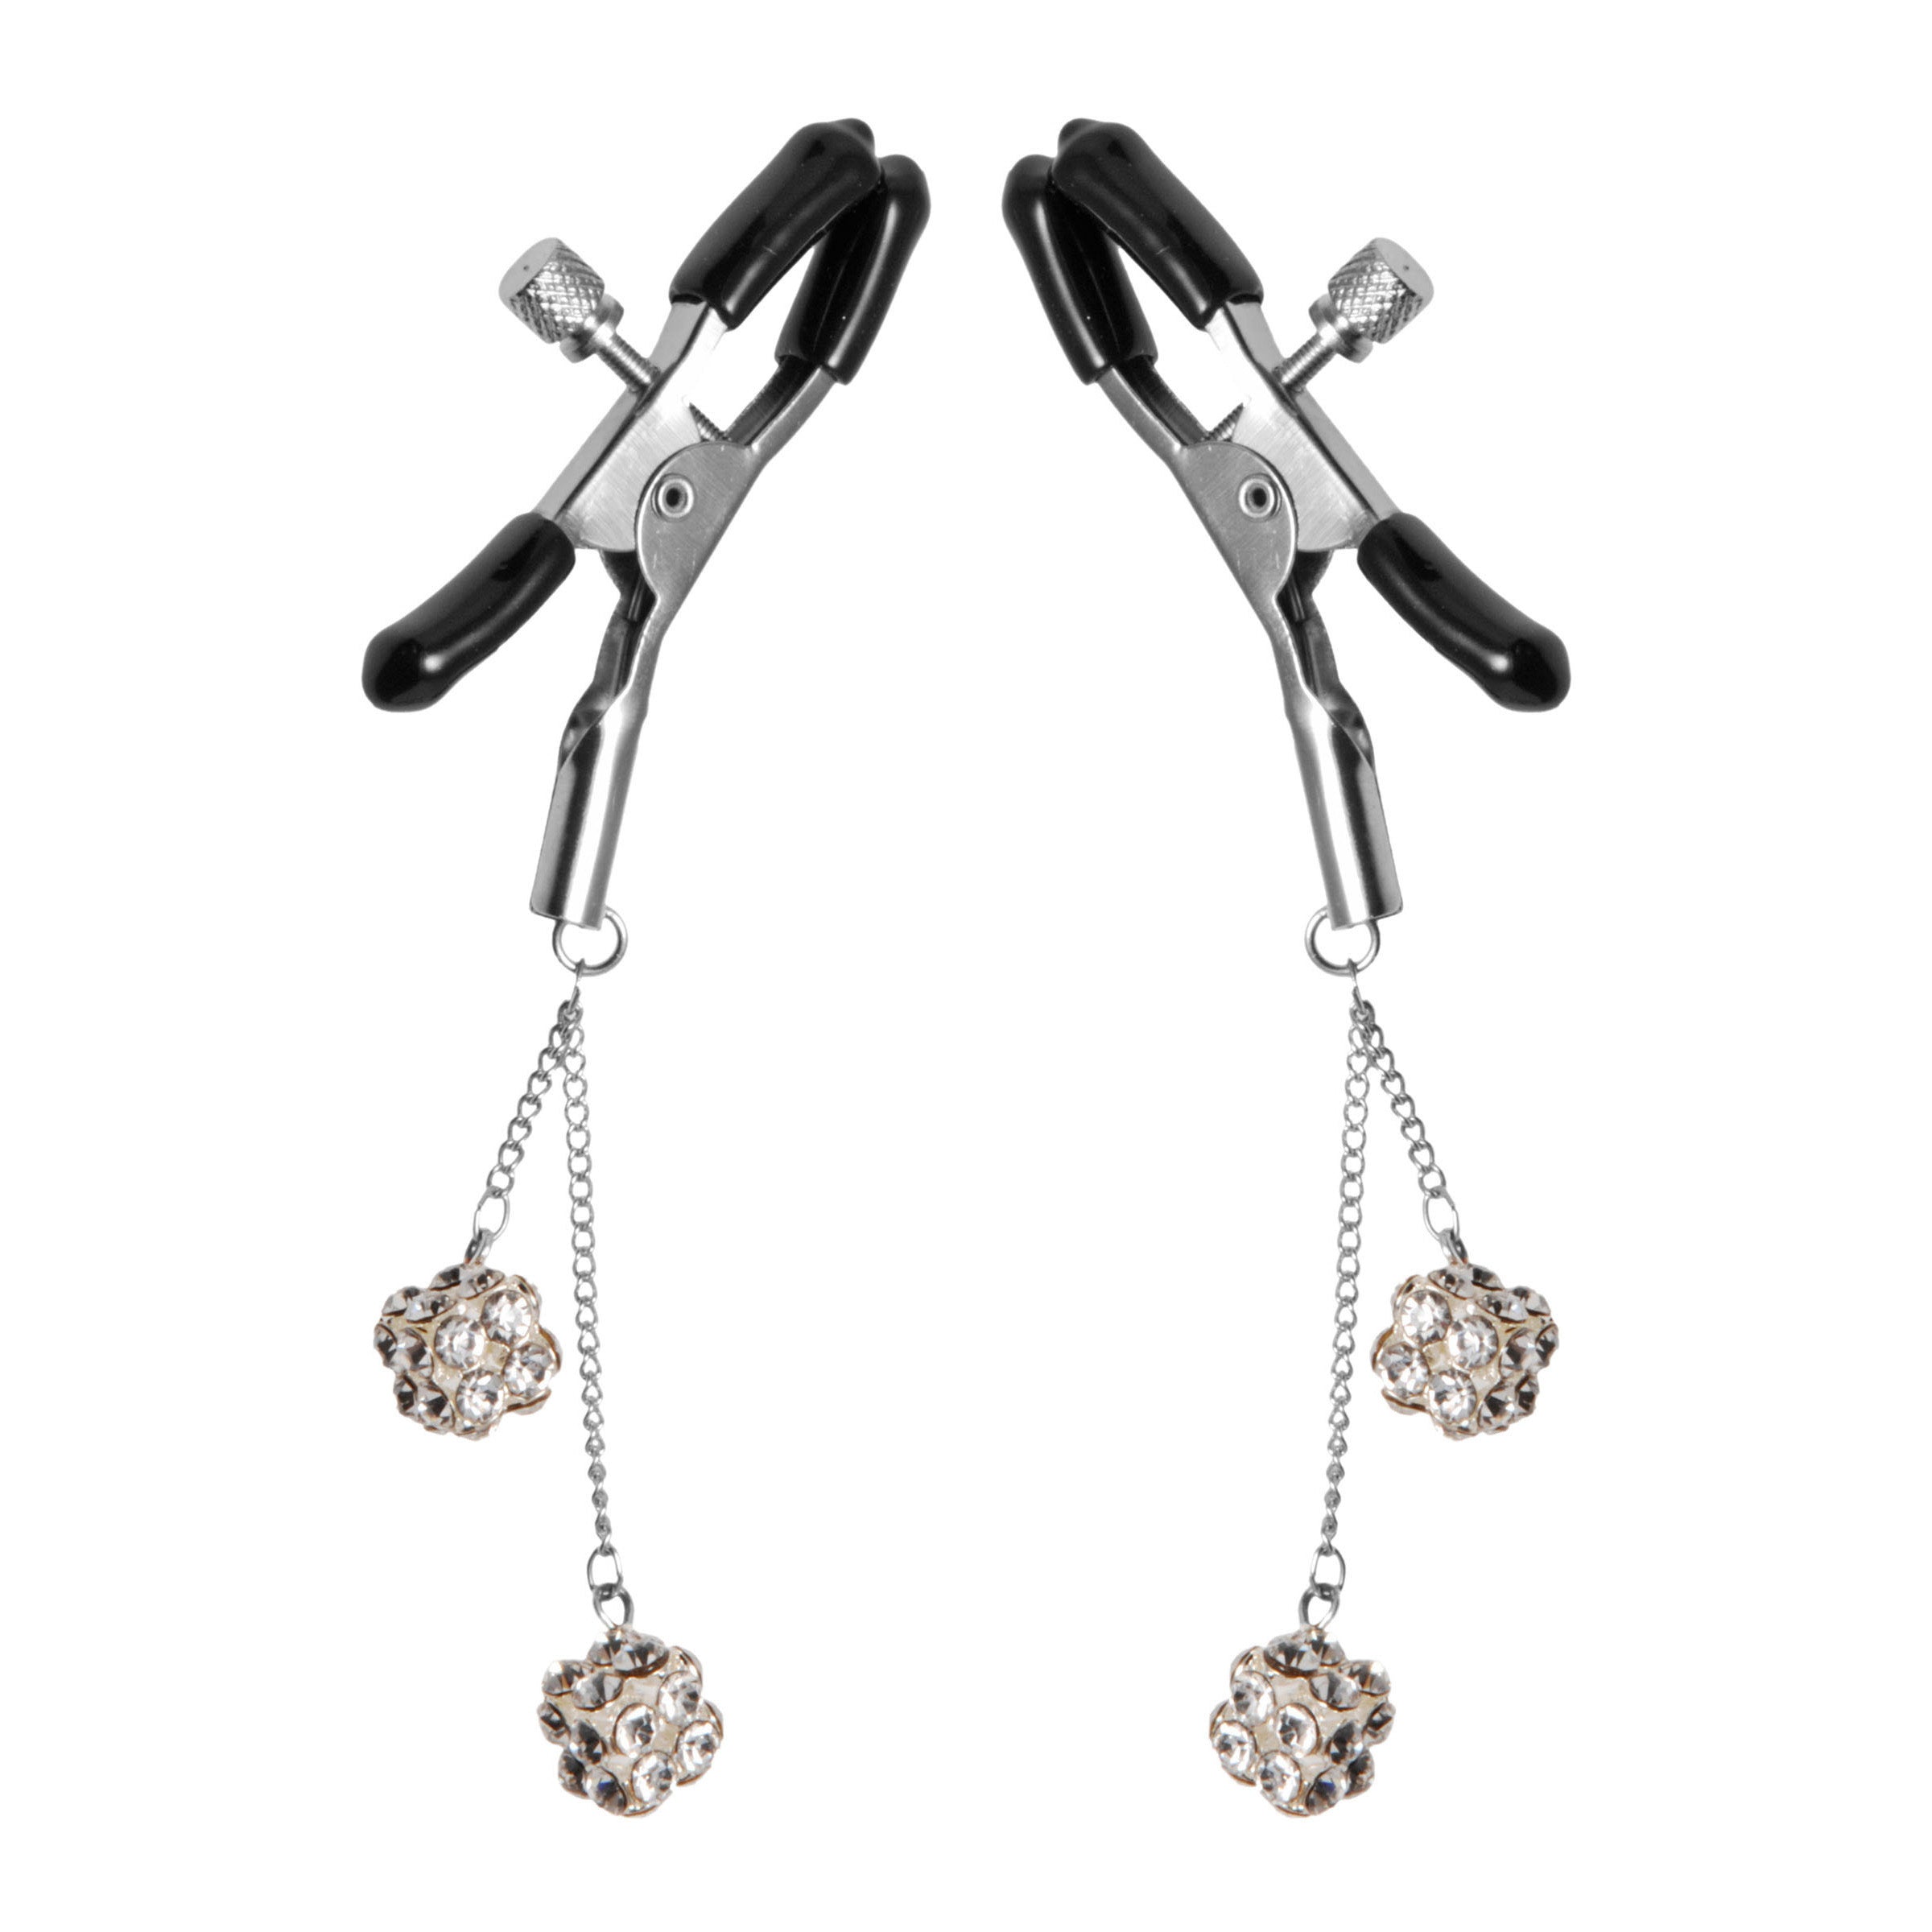 Ornament Adjustable Nipple Clamps with Jewel Accents